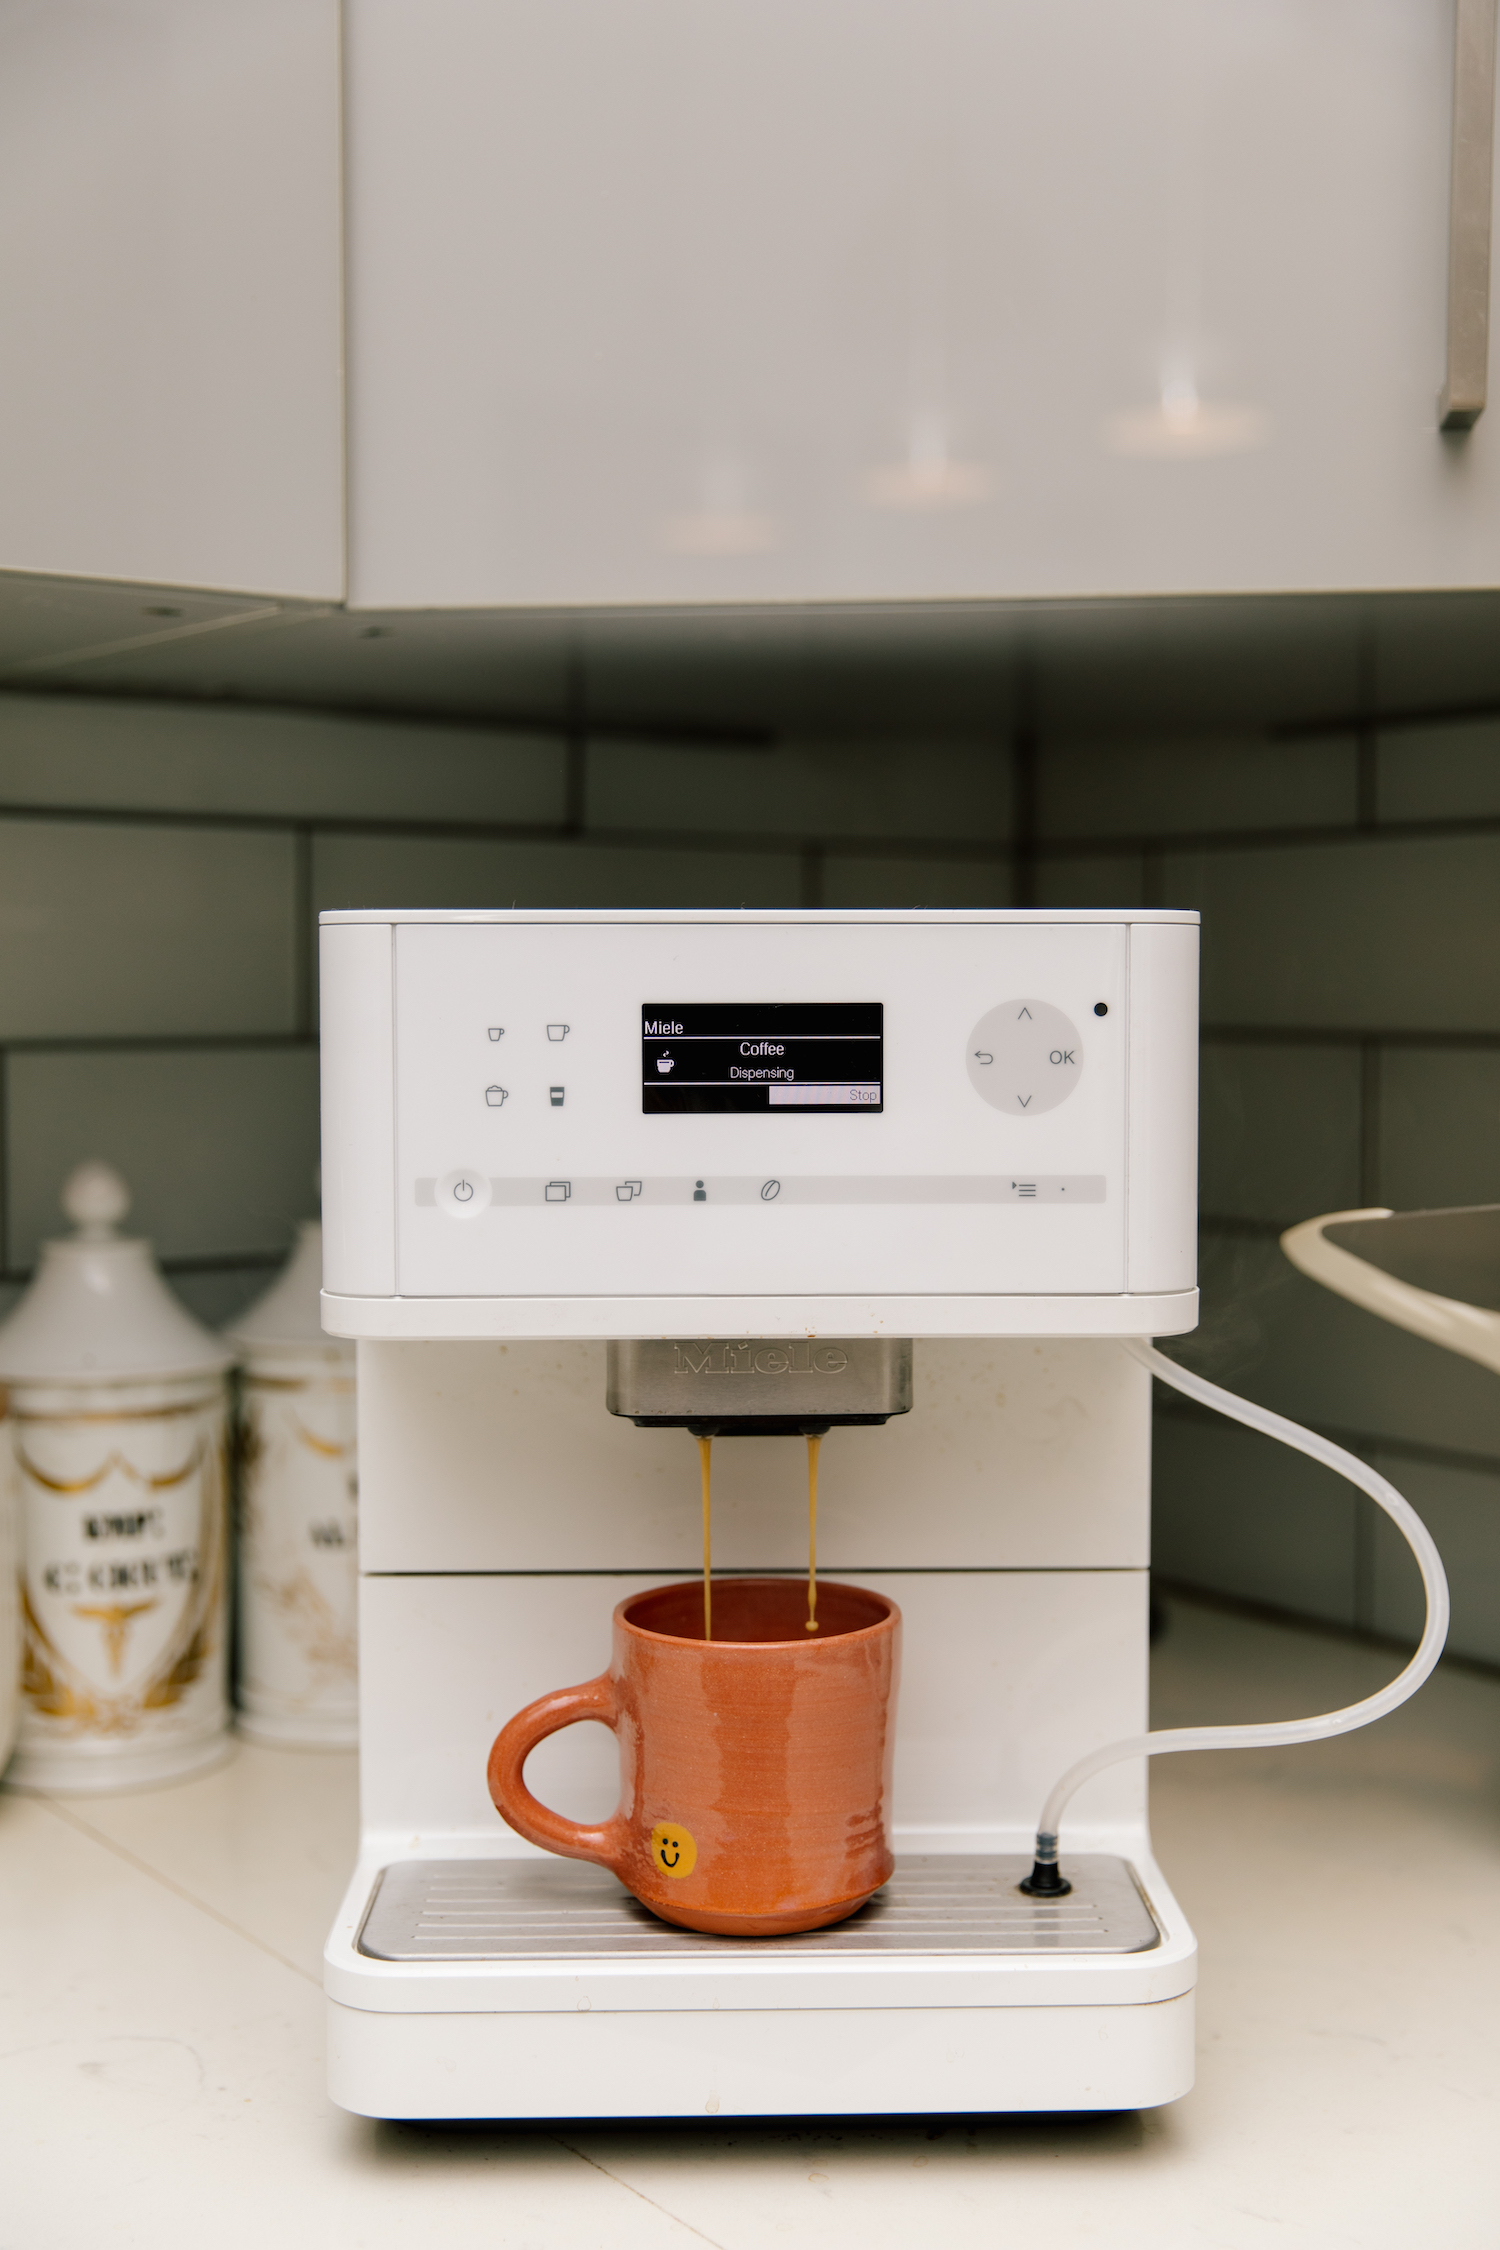 Miele Coffee Maker Review | Your Favorite Blog Posts of 2022